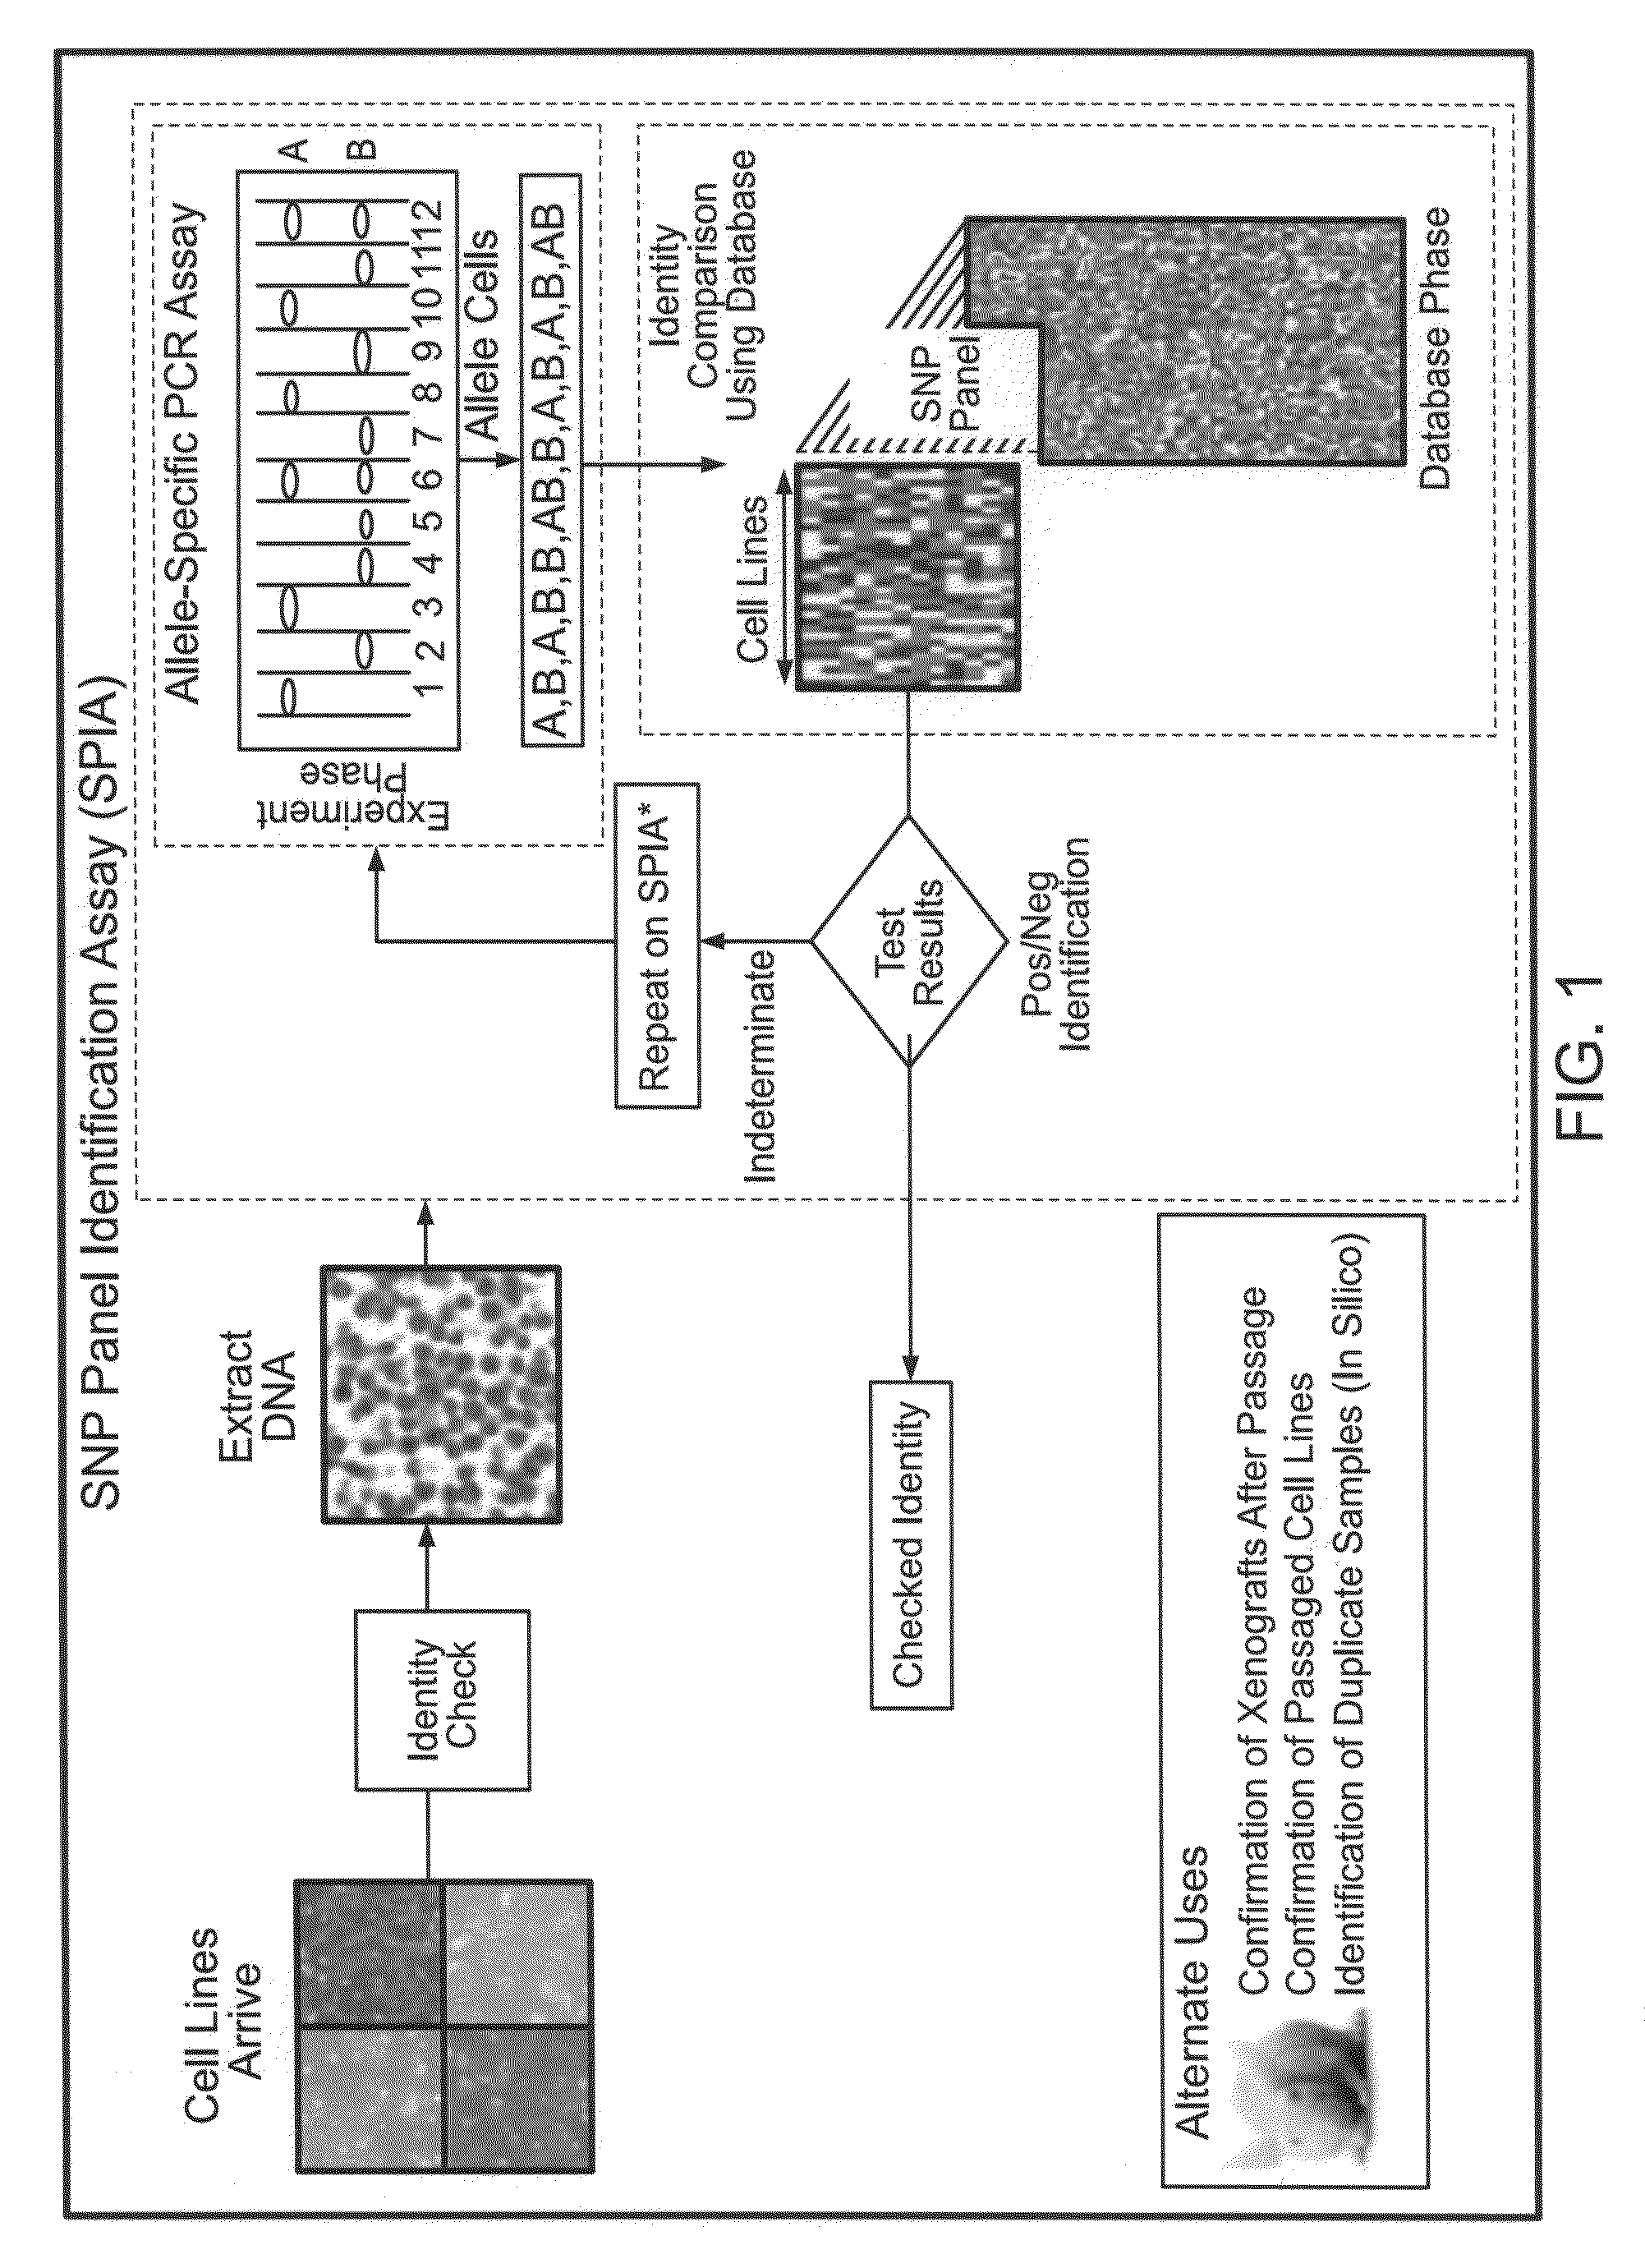 Methods for identifying and using SNP panels